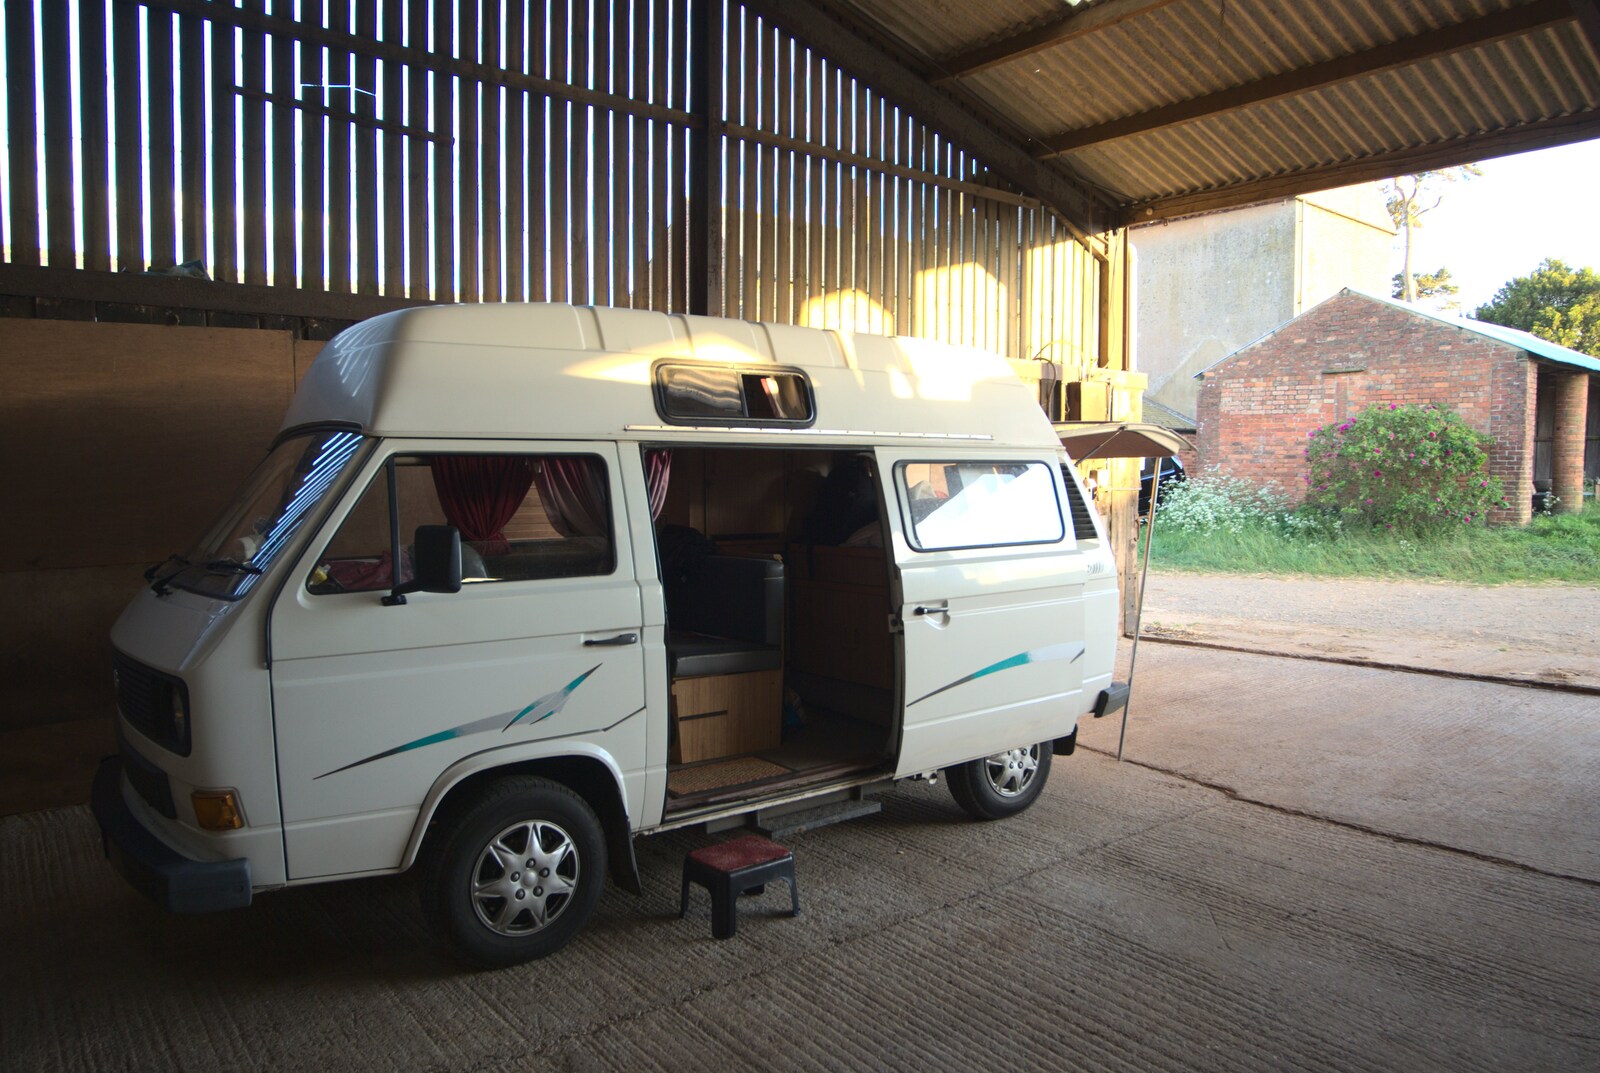 The campervan, parked up in a barn from A Christening, Wilford, Northamptonshire - 22nd May 2011